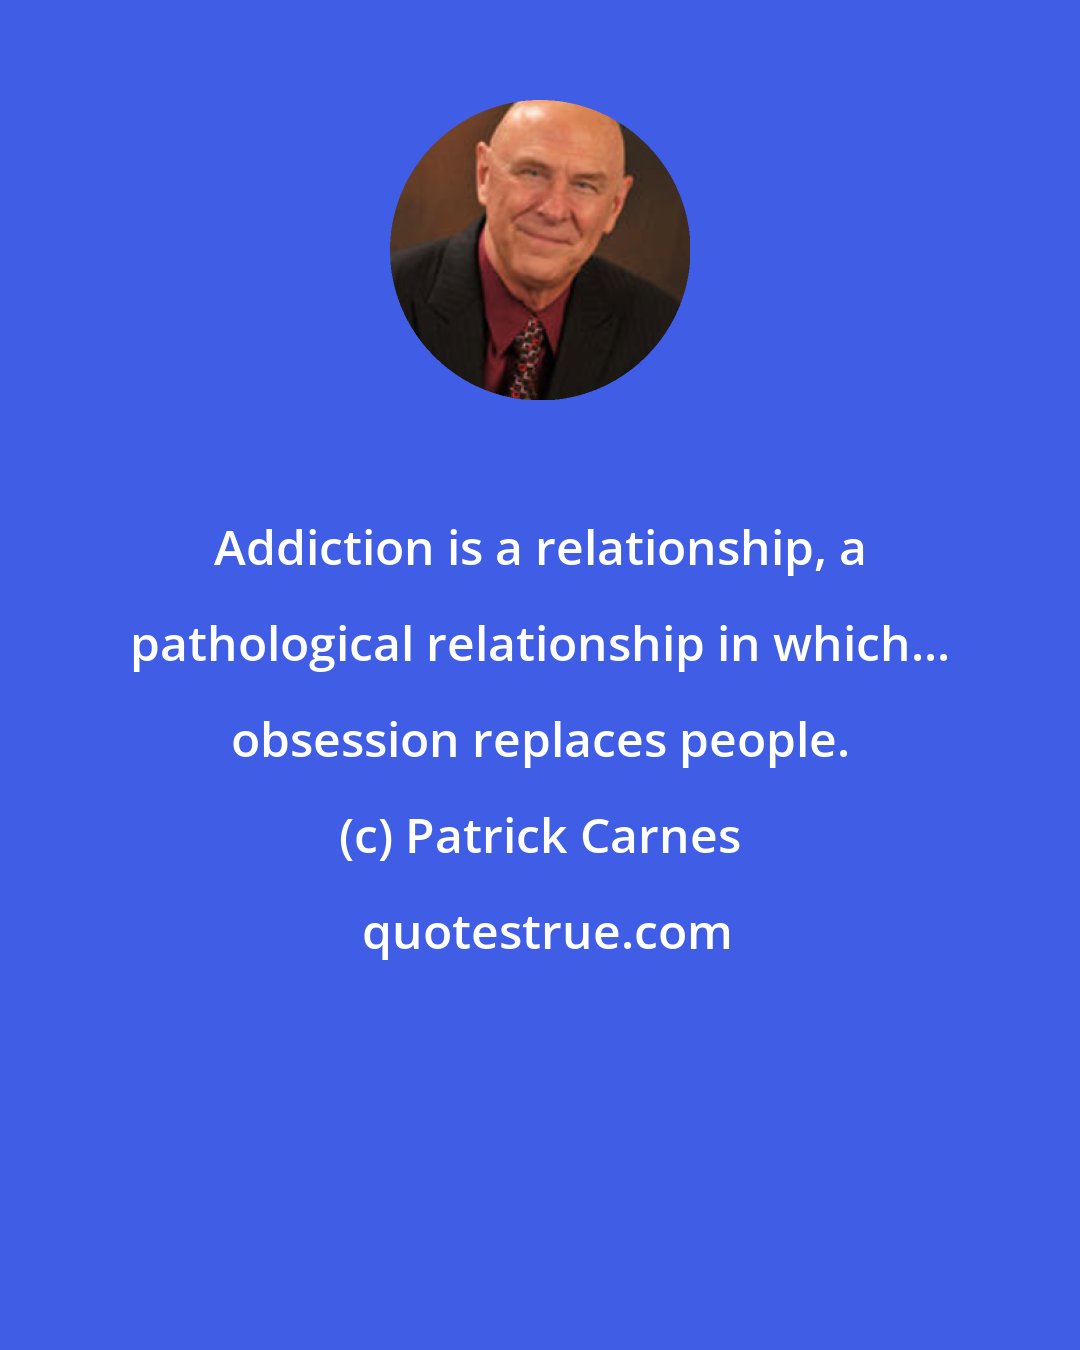 Patrick Carnes: Addiction is a relationship, a pathological relationship in which... obsession replaces people.